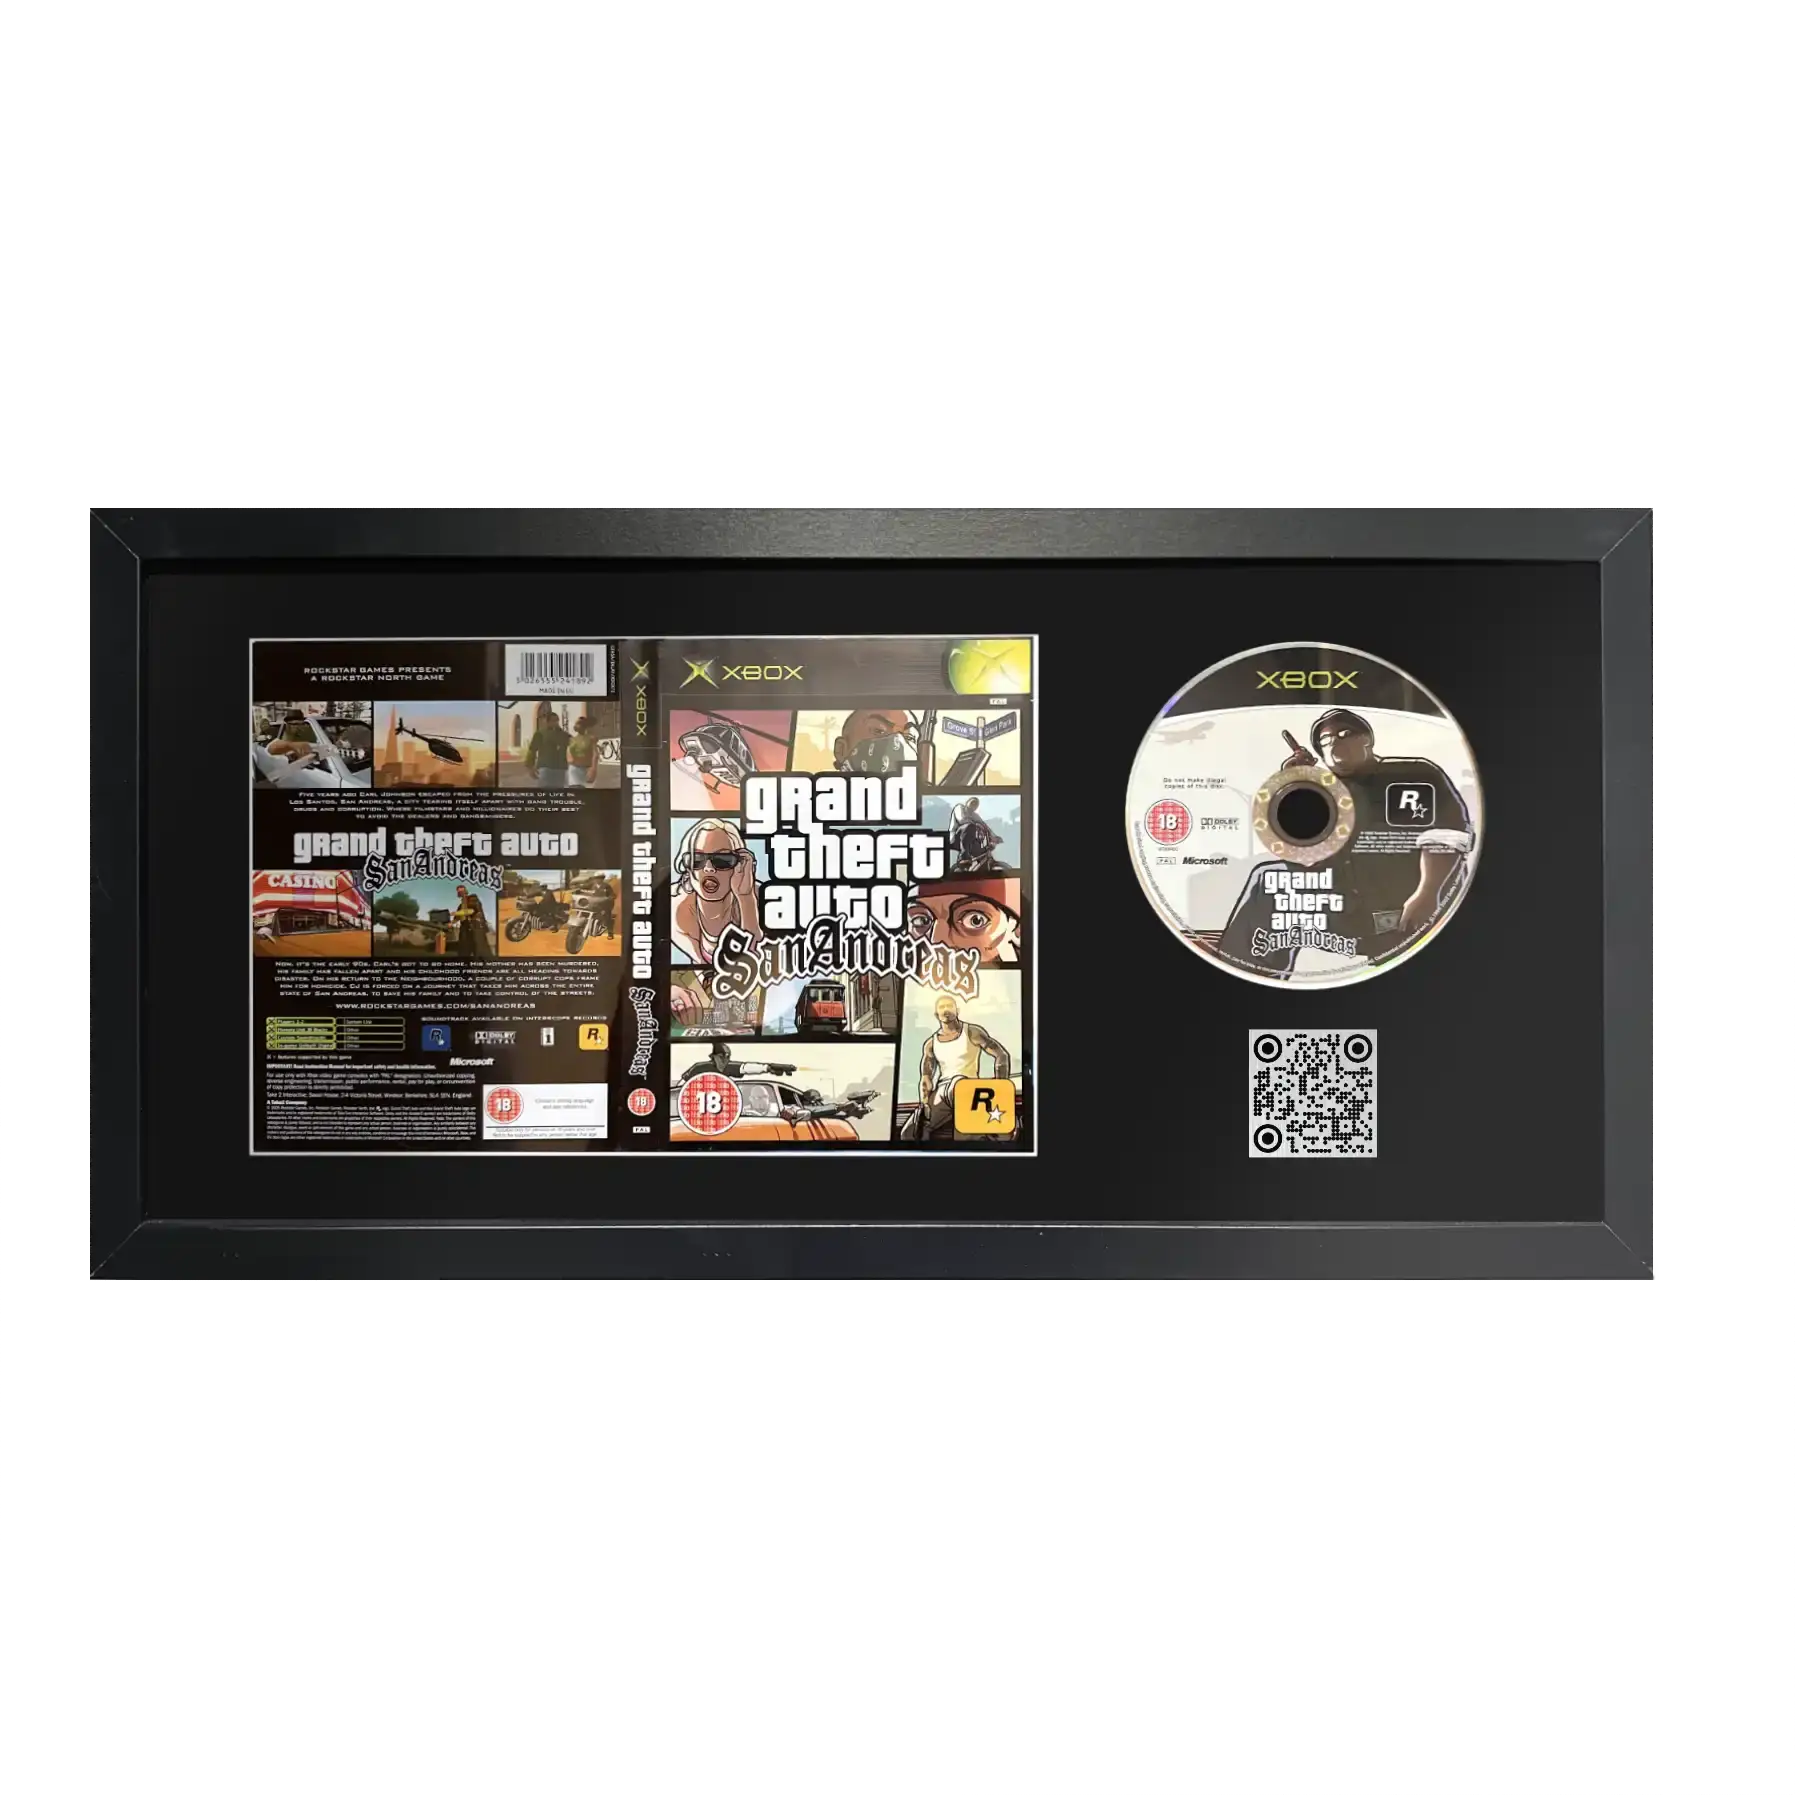 Grand Theft Auto San Andreas on Xbox as a framed Game with QR code